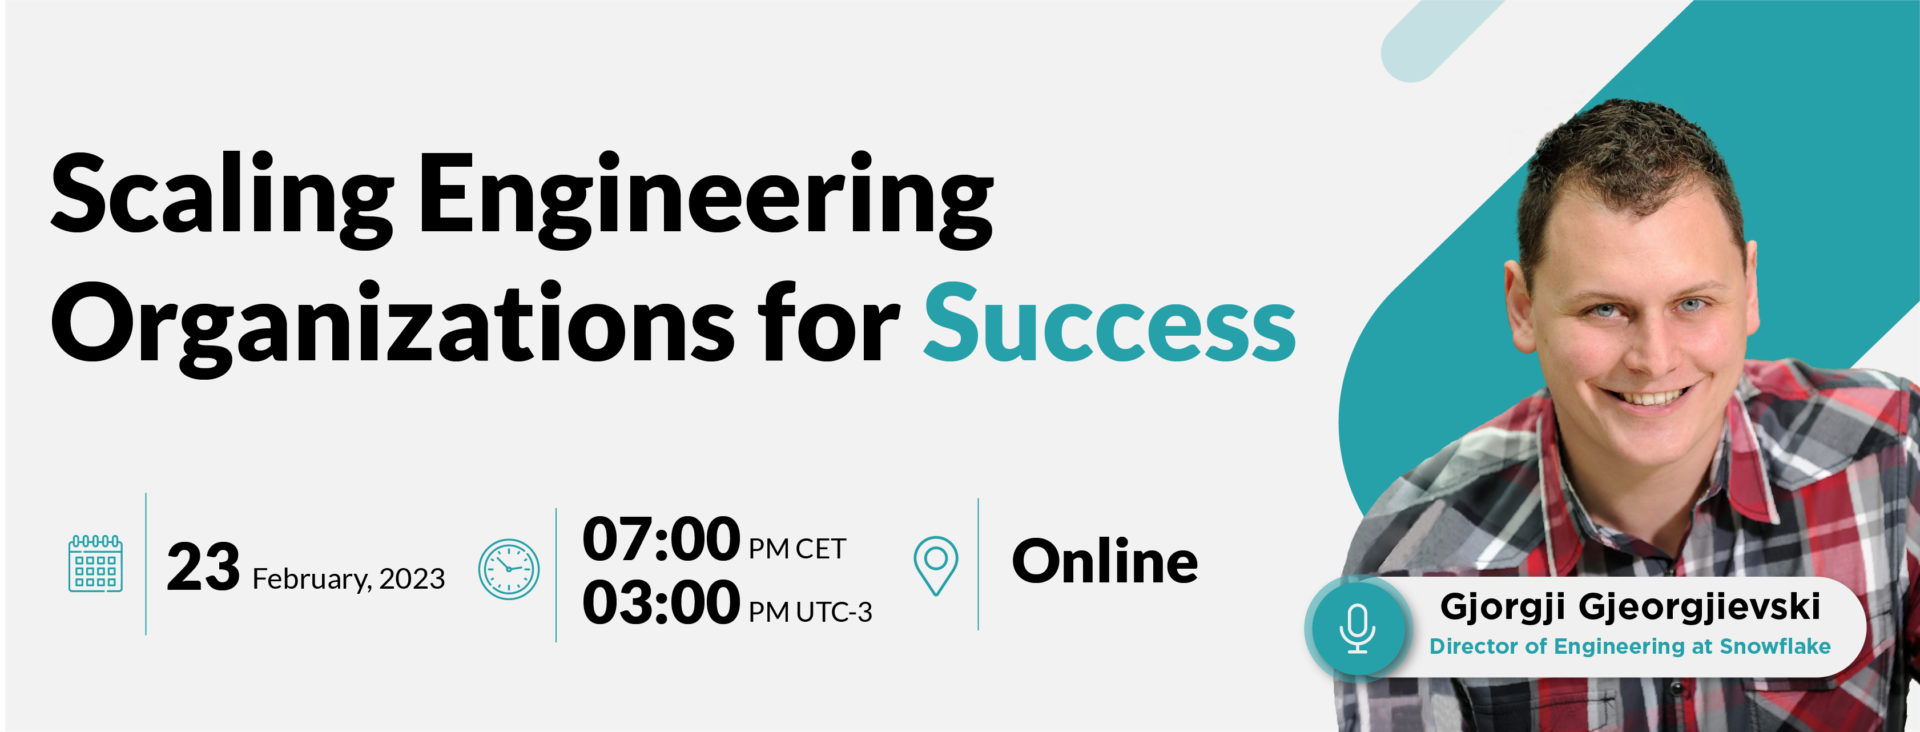 Re:Imagine Session: Scaling Engineering Organizations for Success with Gjorgji Gjeorgjievski